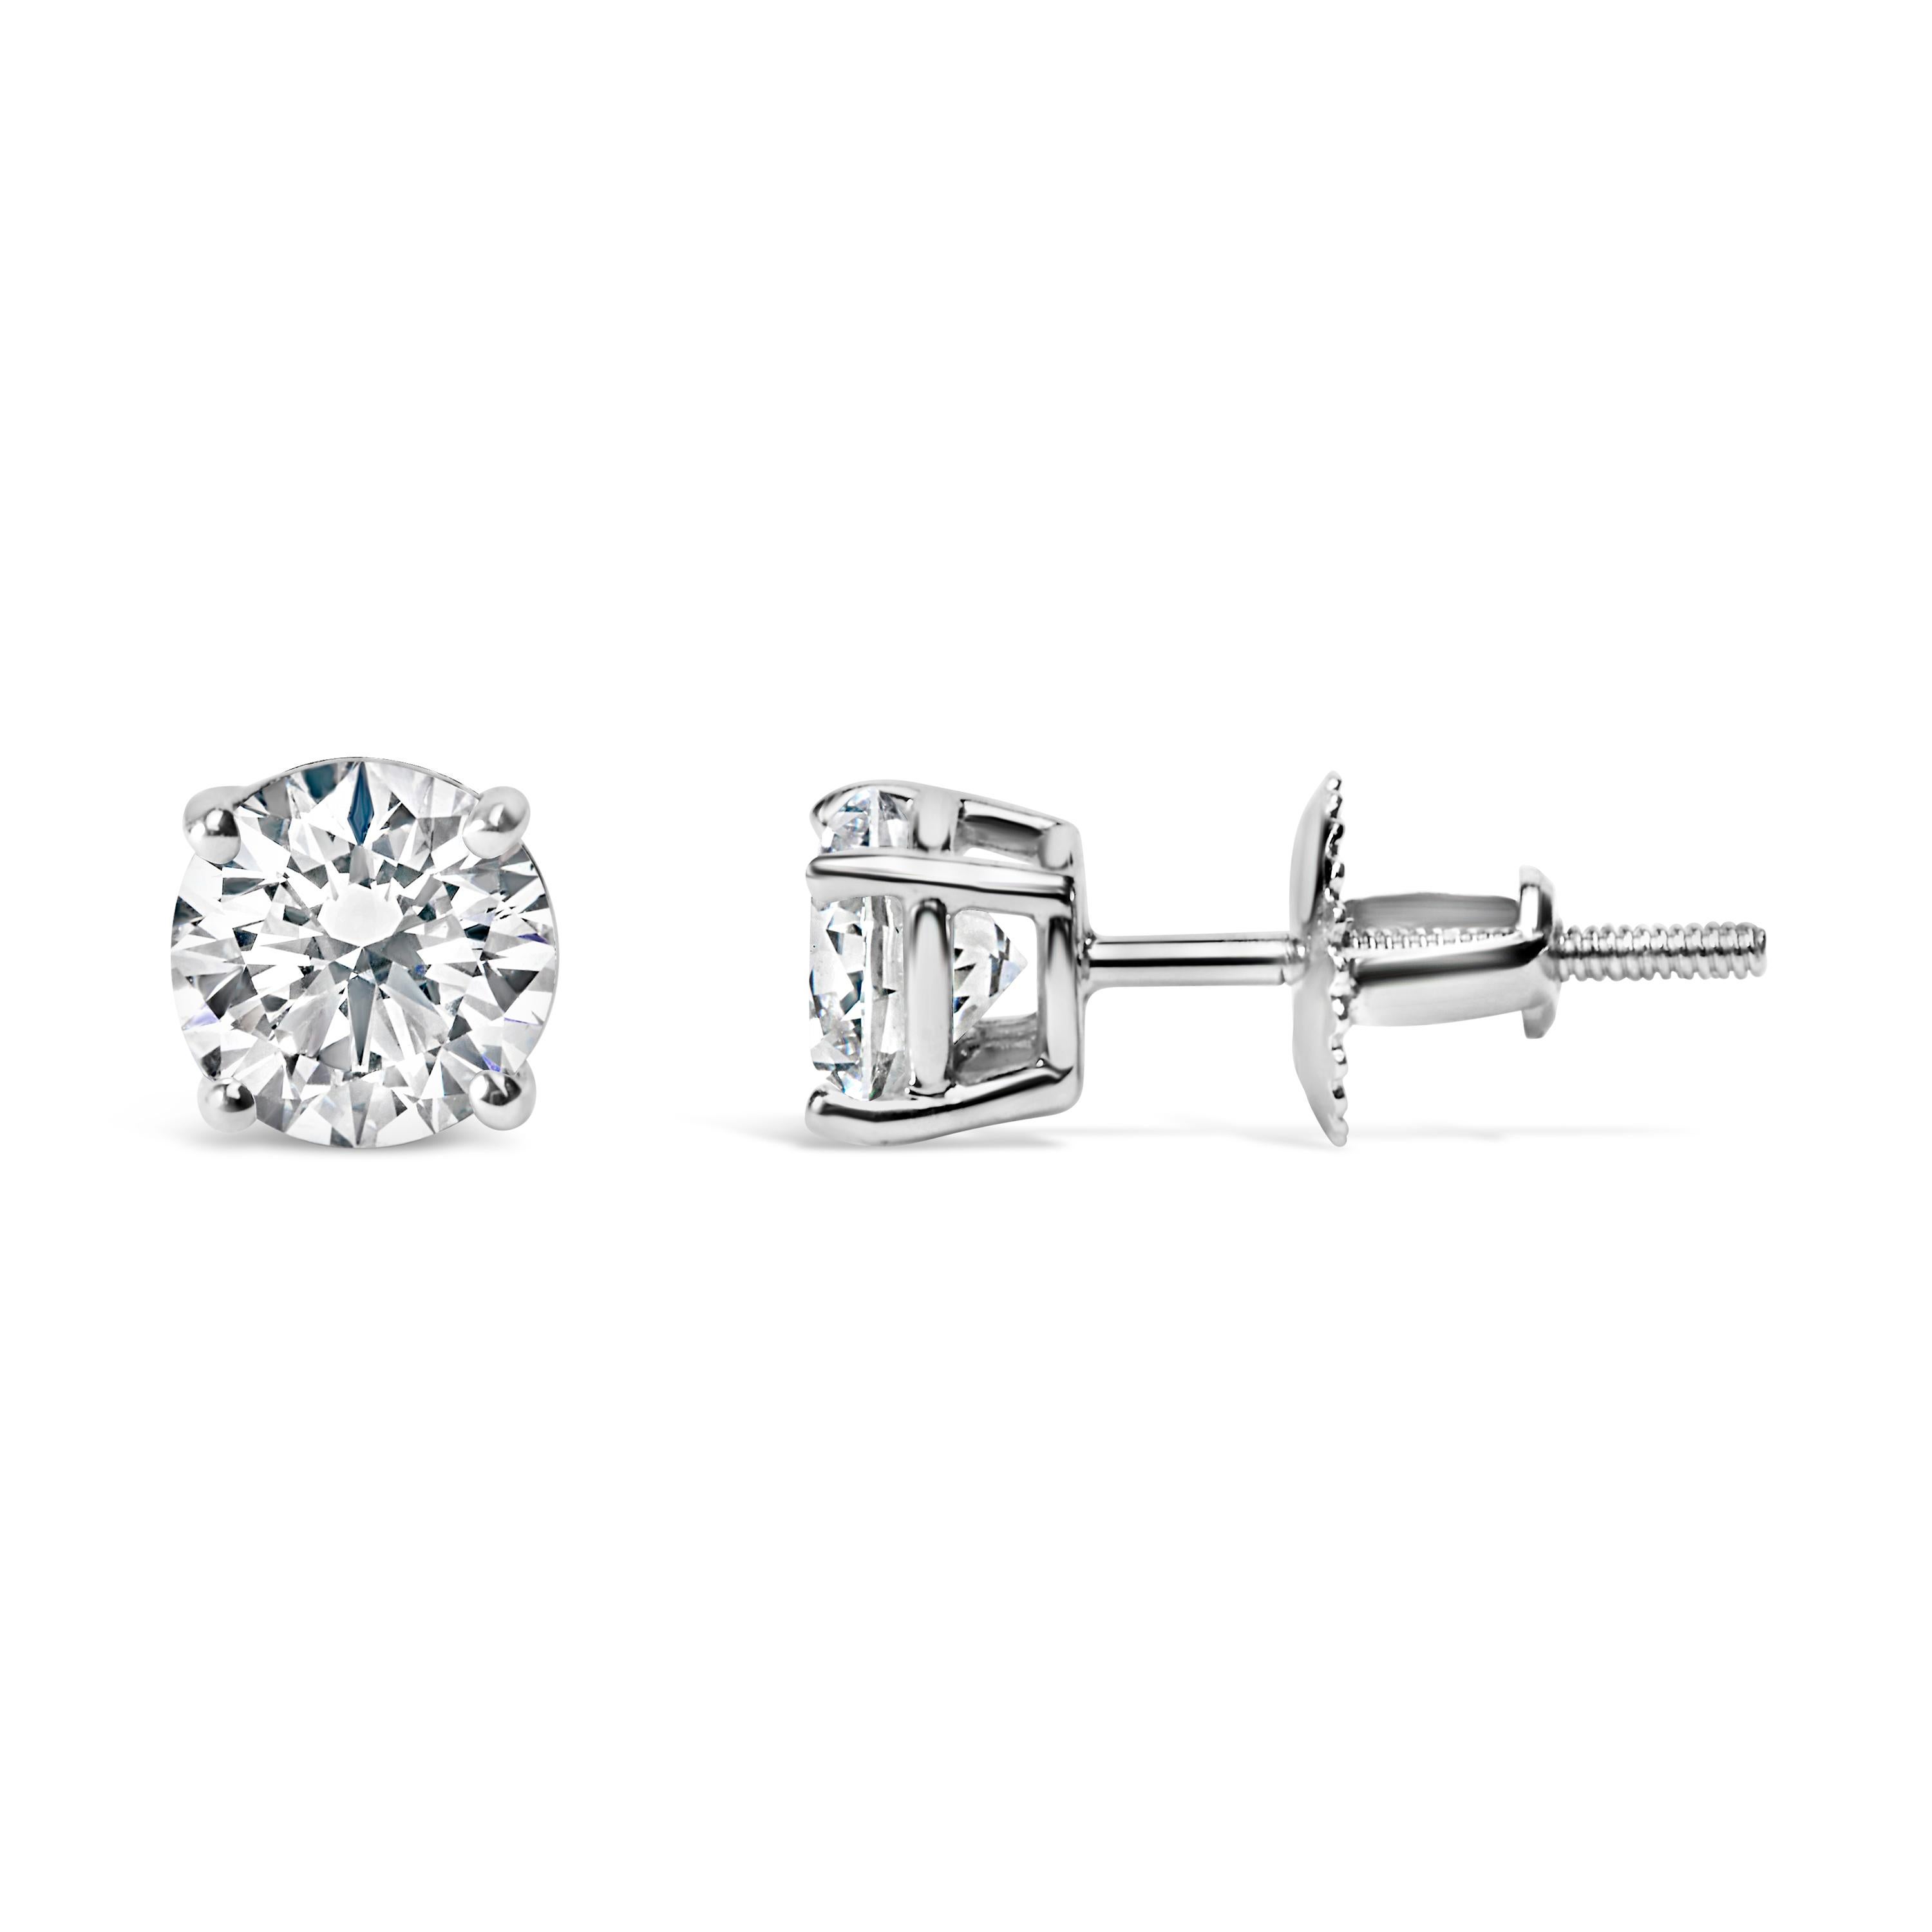 Modern IGI Certified 14K White Gold 1 1/2 Carat Round Diamond Solitaire Stud Earrings For Sale